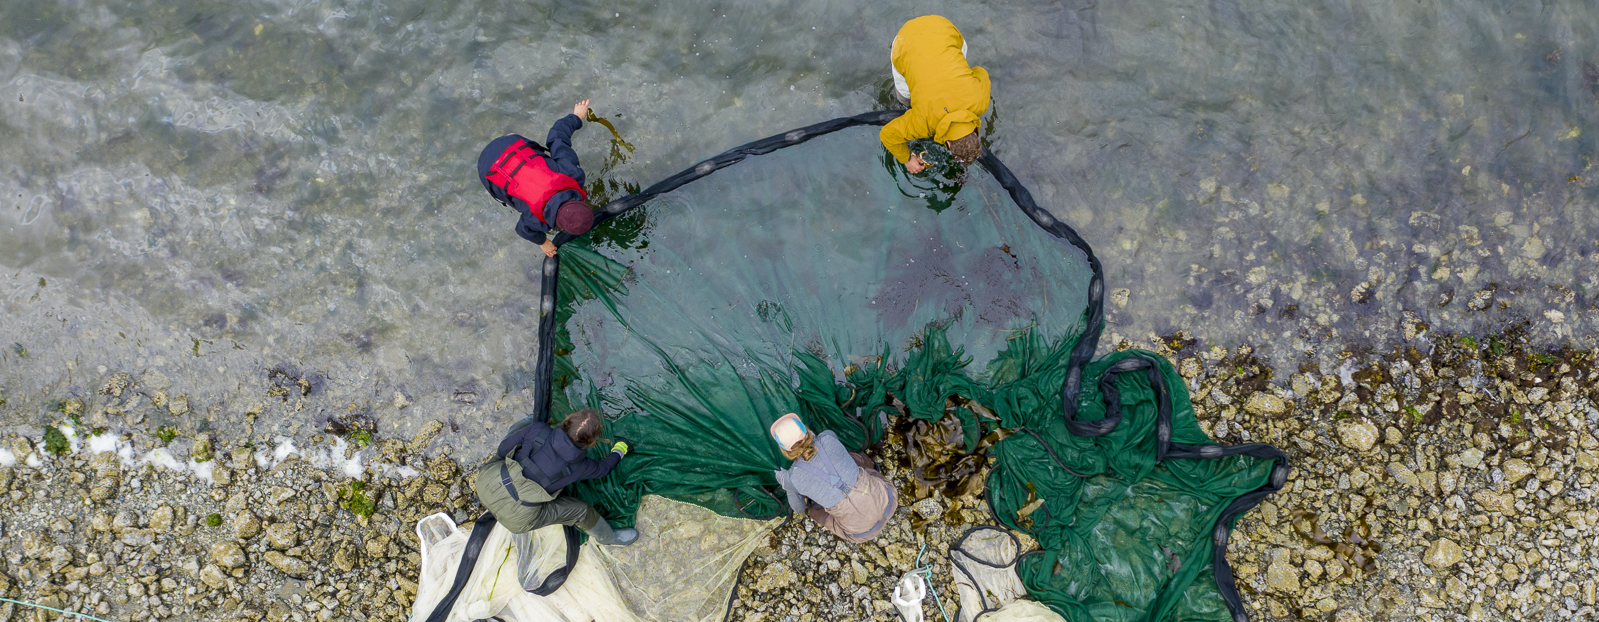 Photo of students on shoreline with fishing net from above